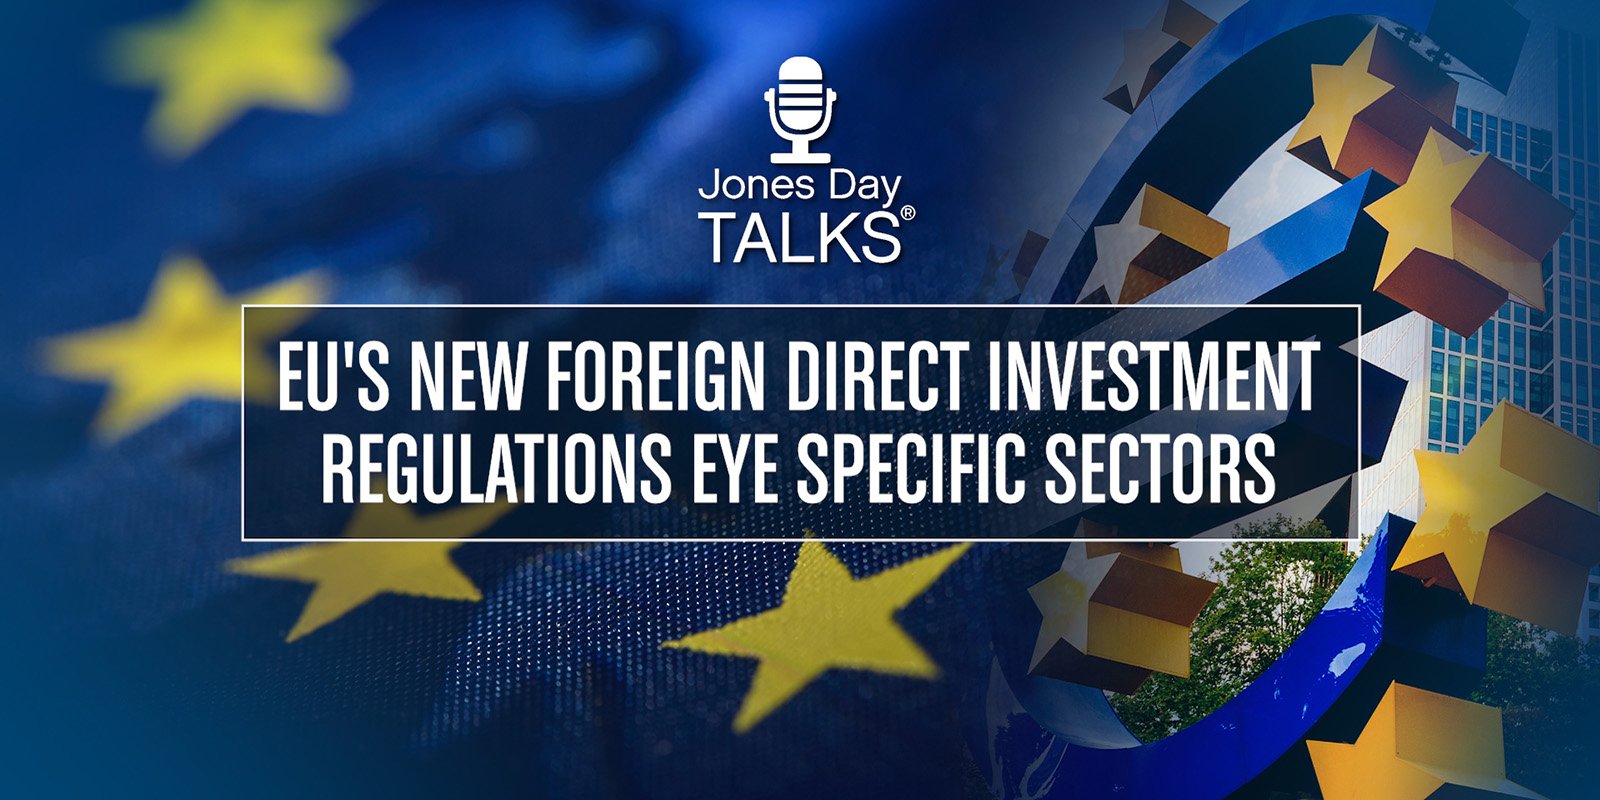   Jones Day Talks: EU's New Foreign Direct Investment Regulations Eye Specific Sectors